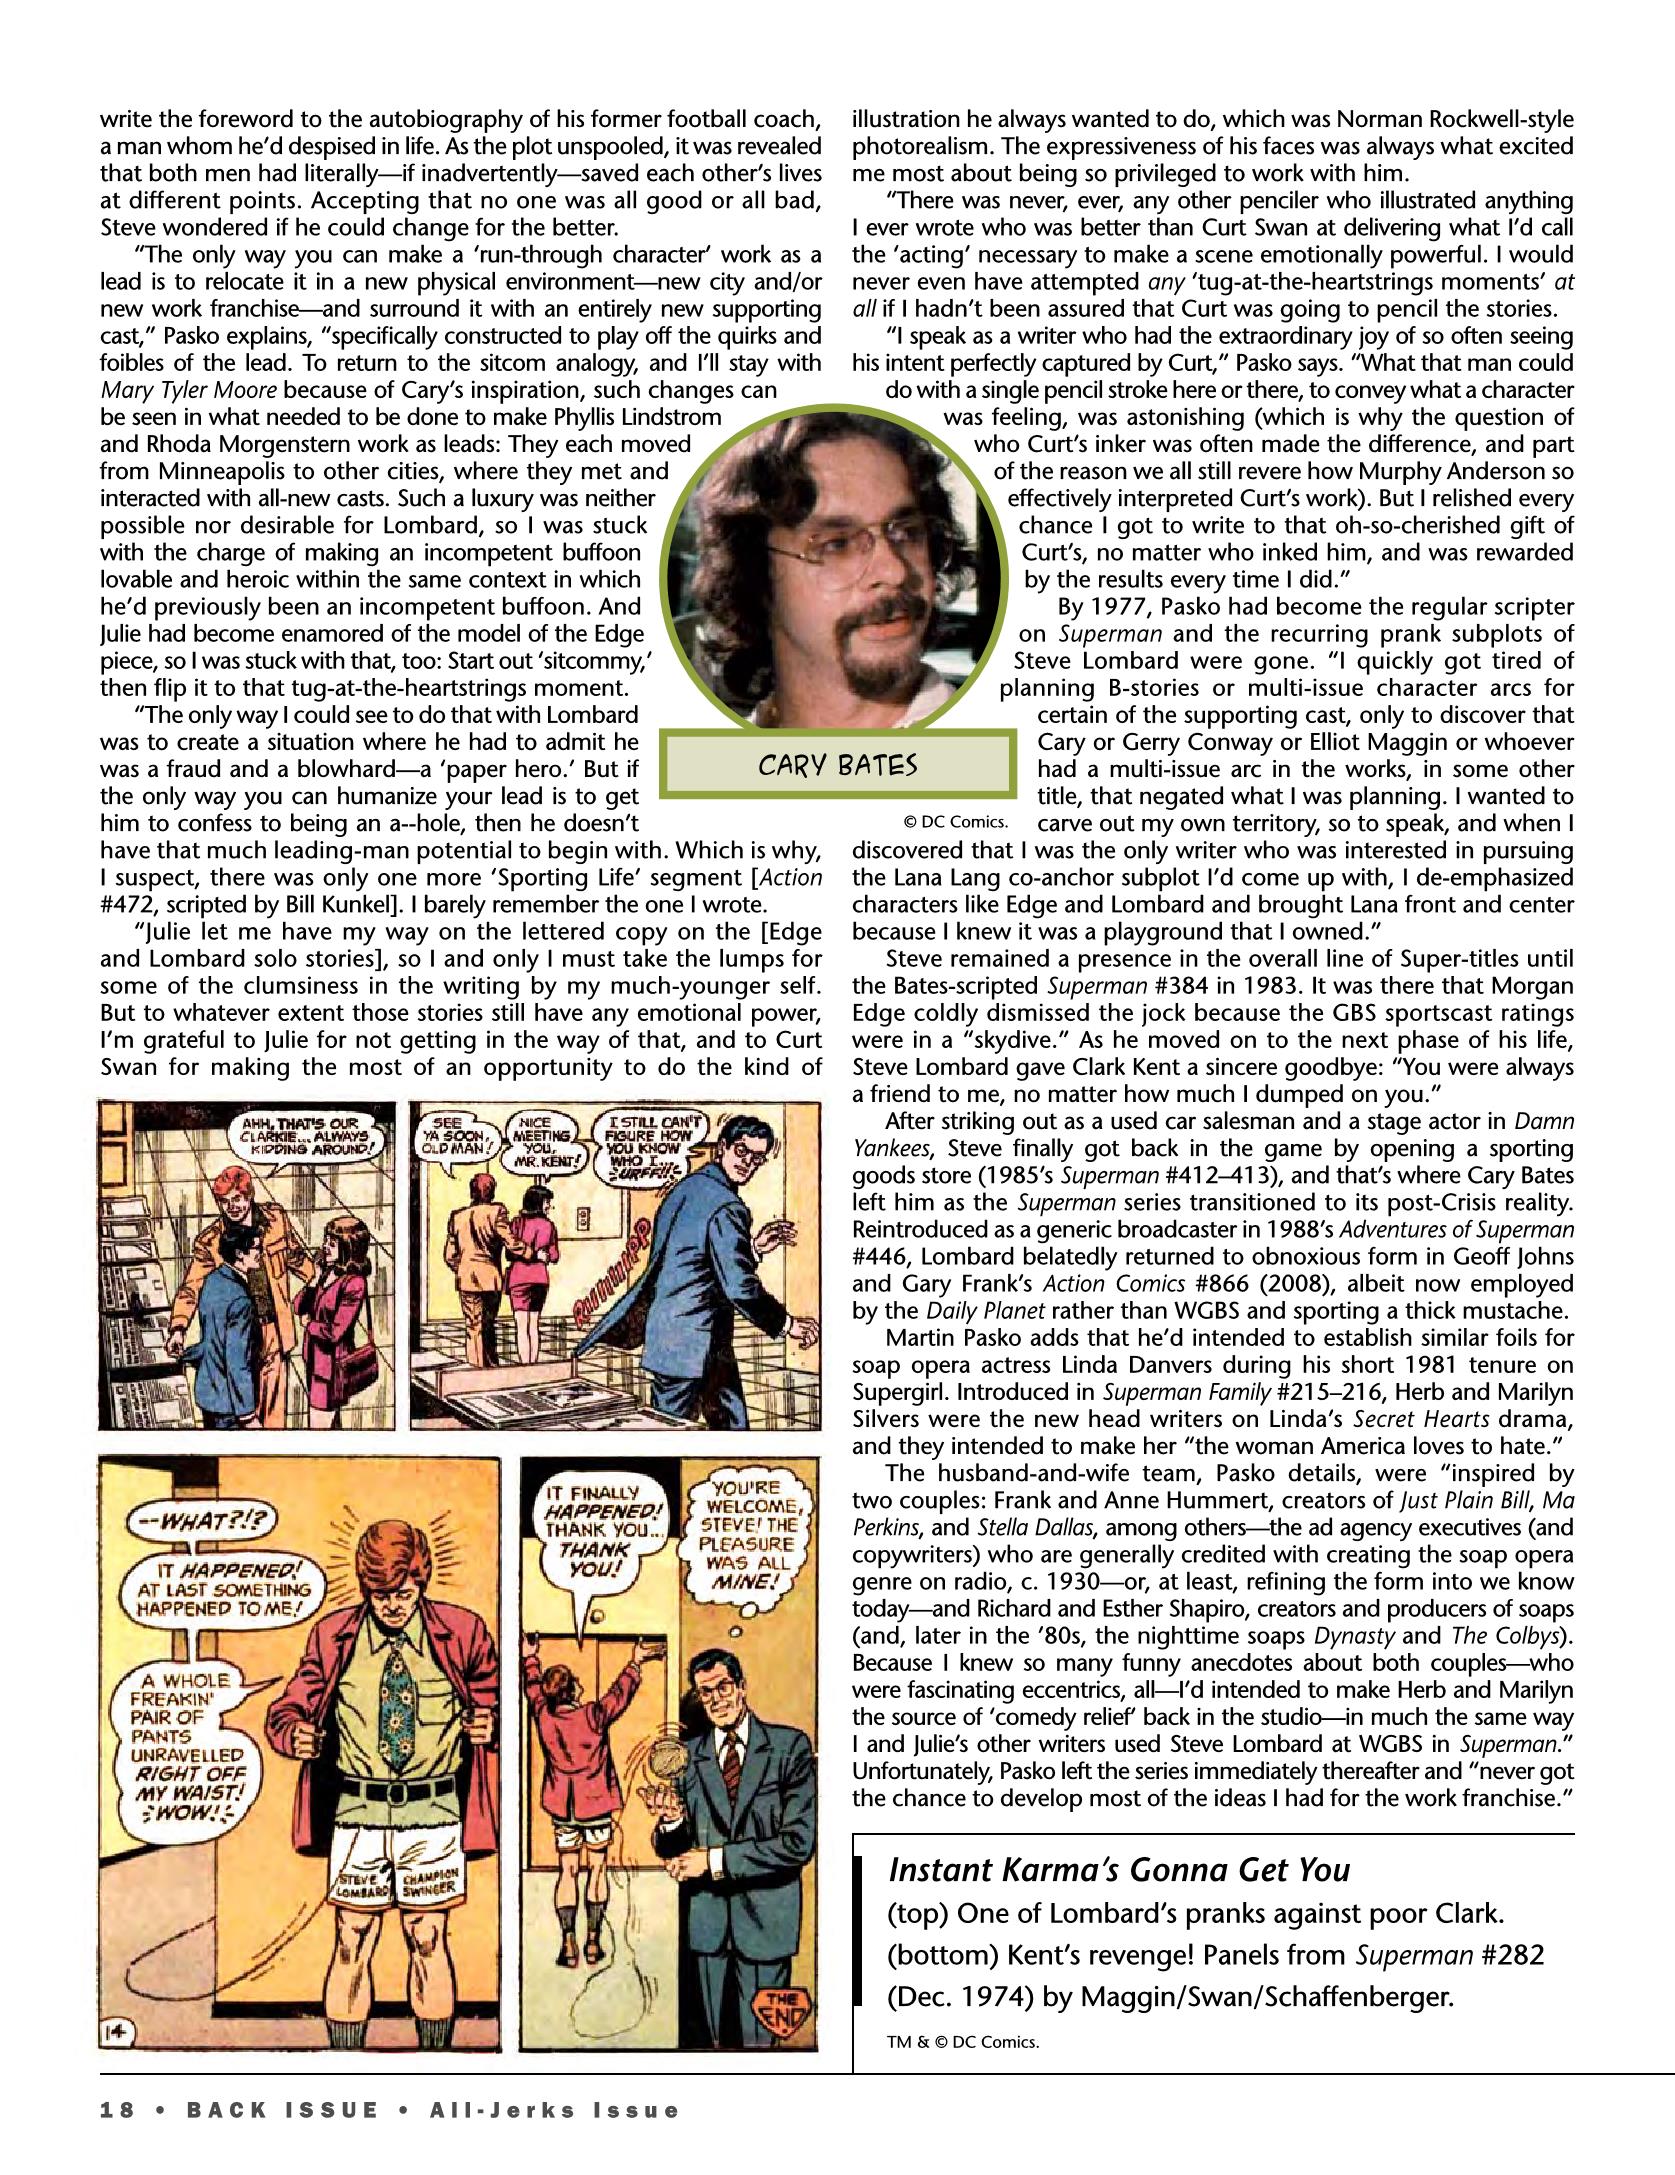 Read online Back Issue comic -  Issue #91 - 13